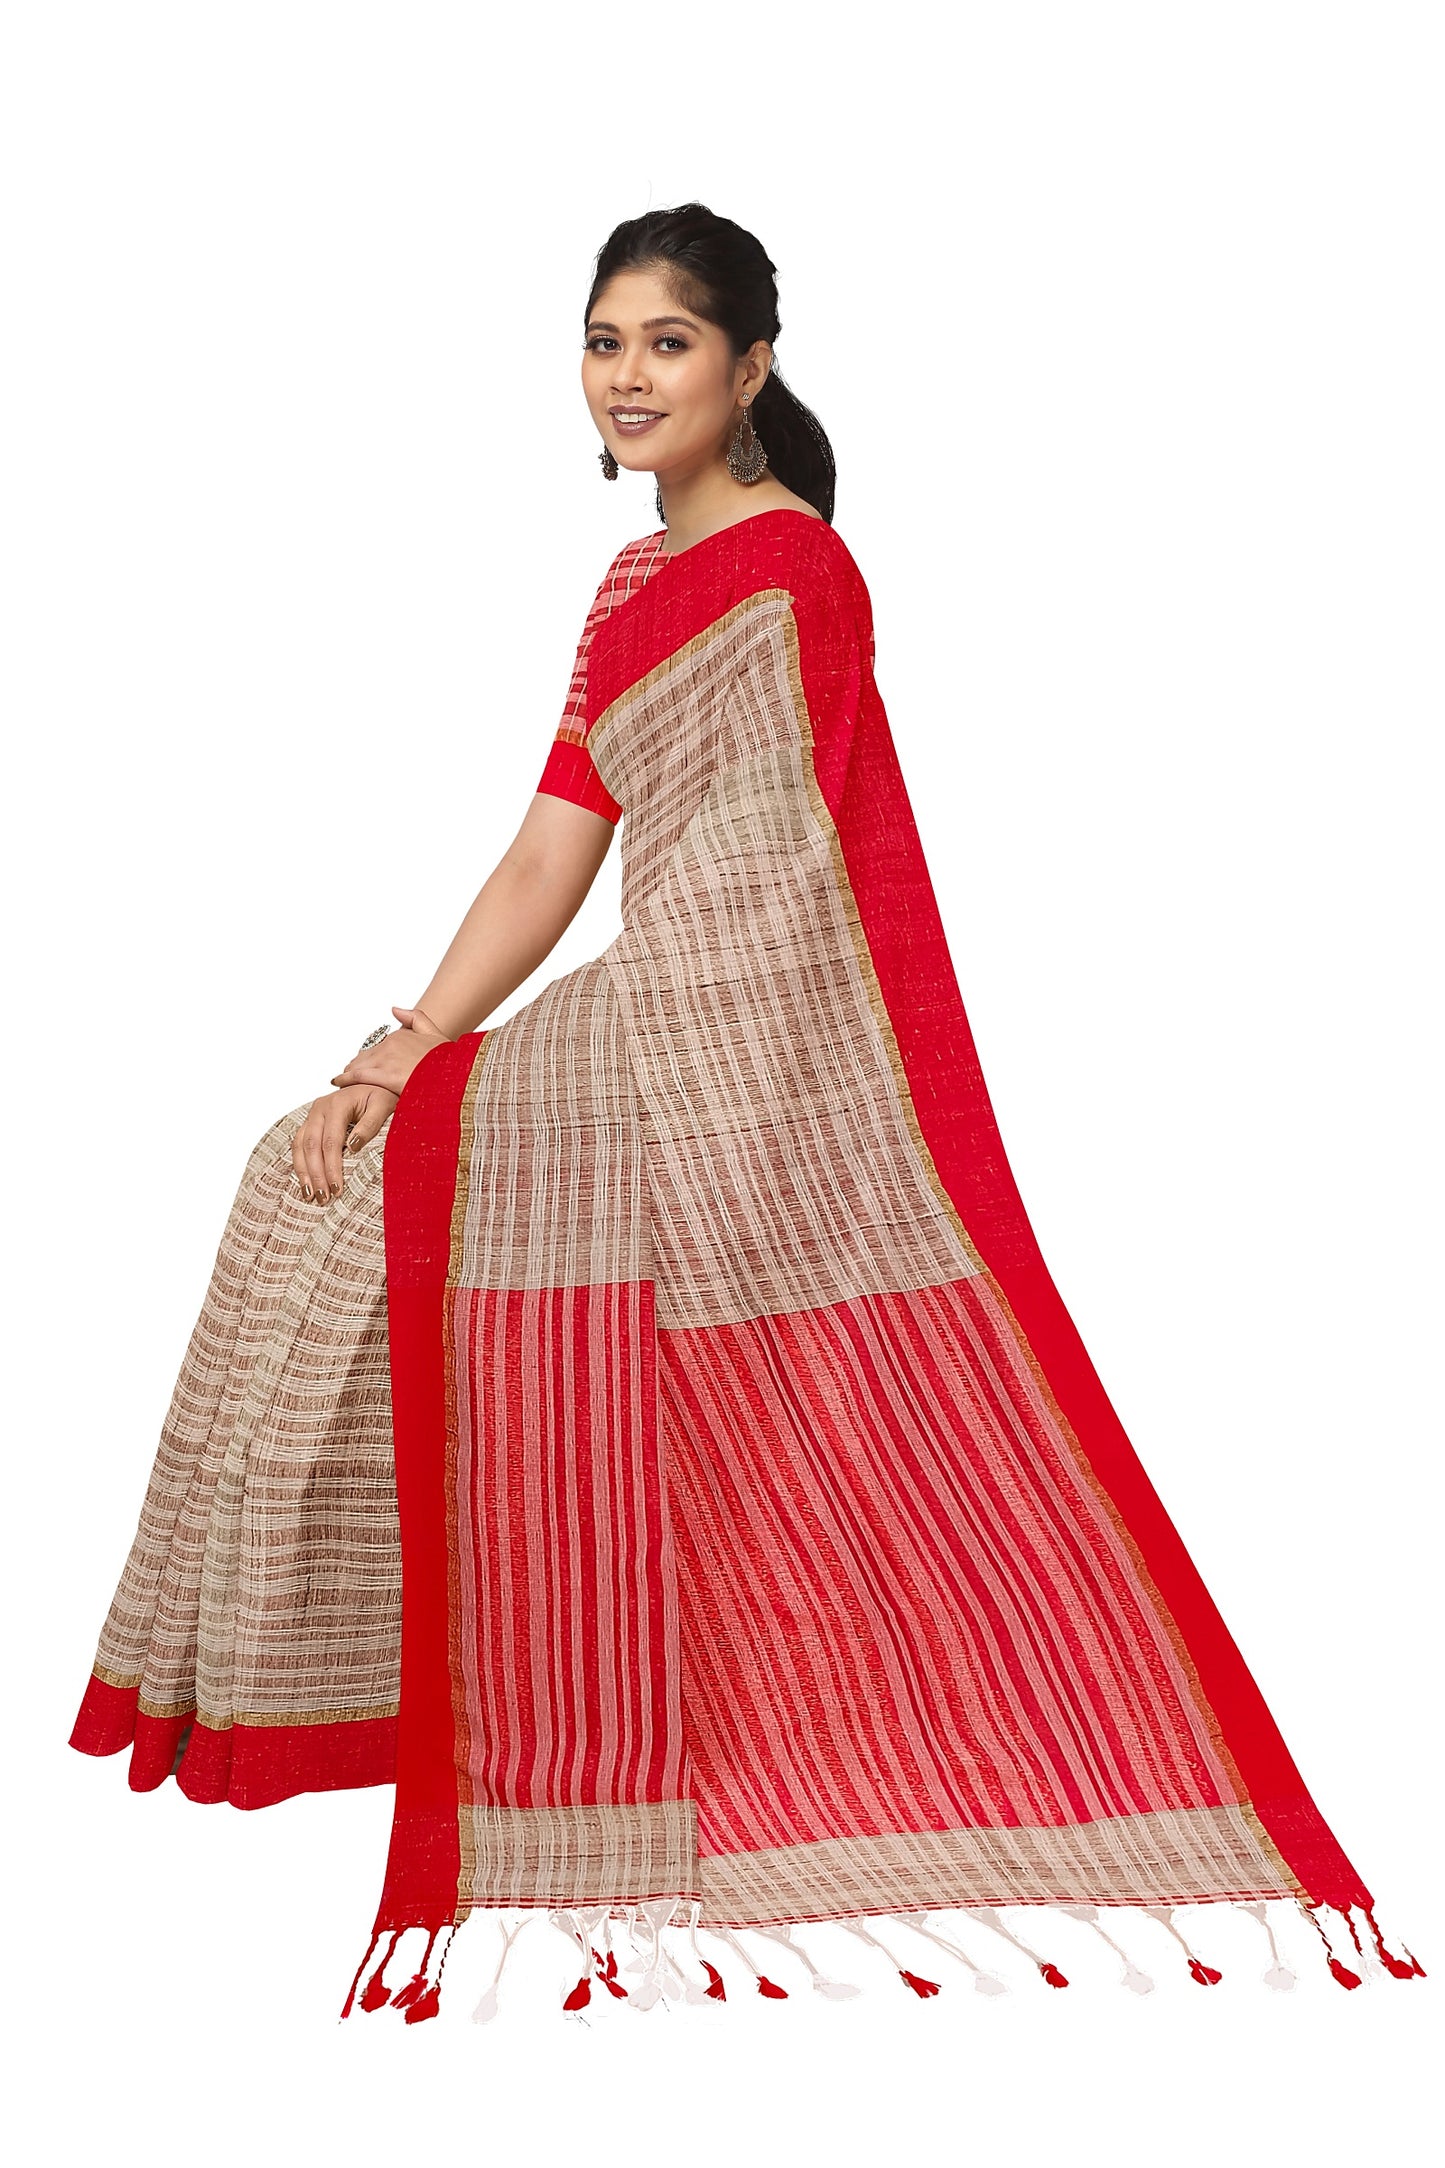 Handloom Tussar Silk sarees with a stunning Bright Red Contrast Borde